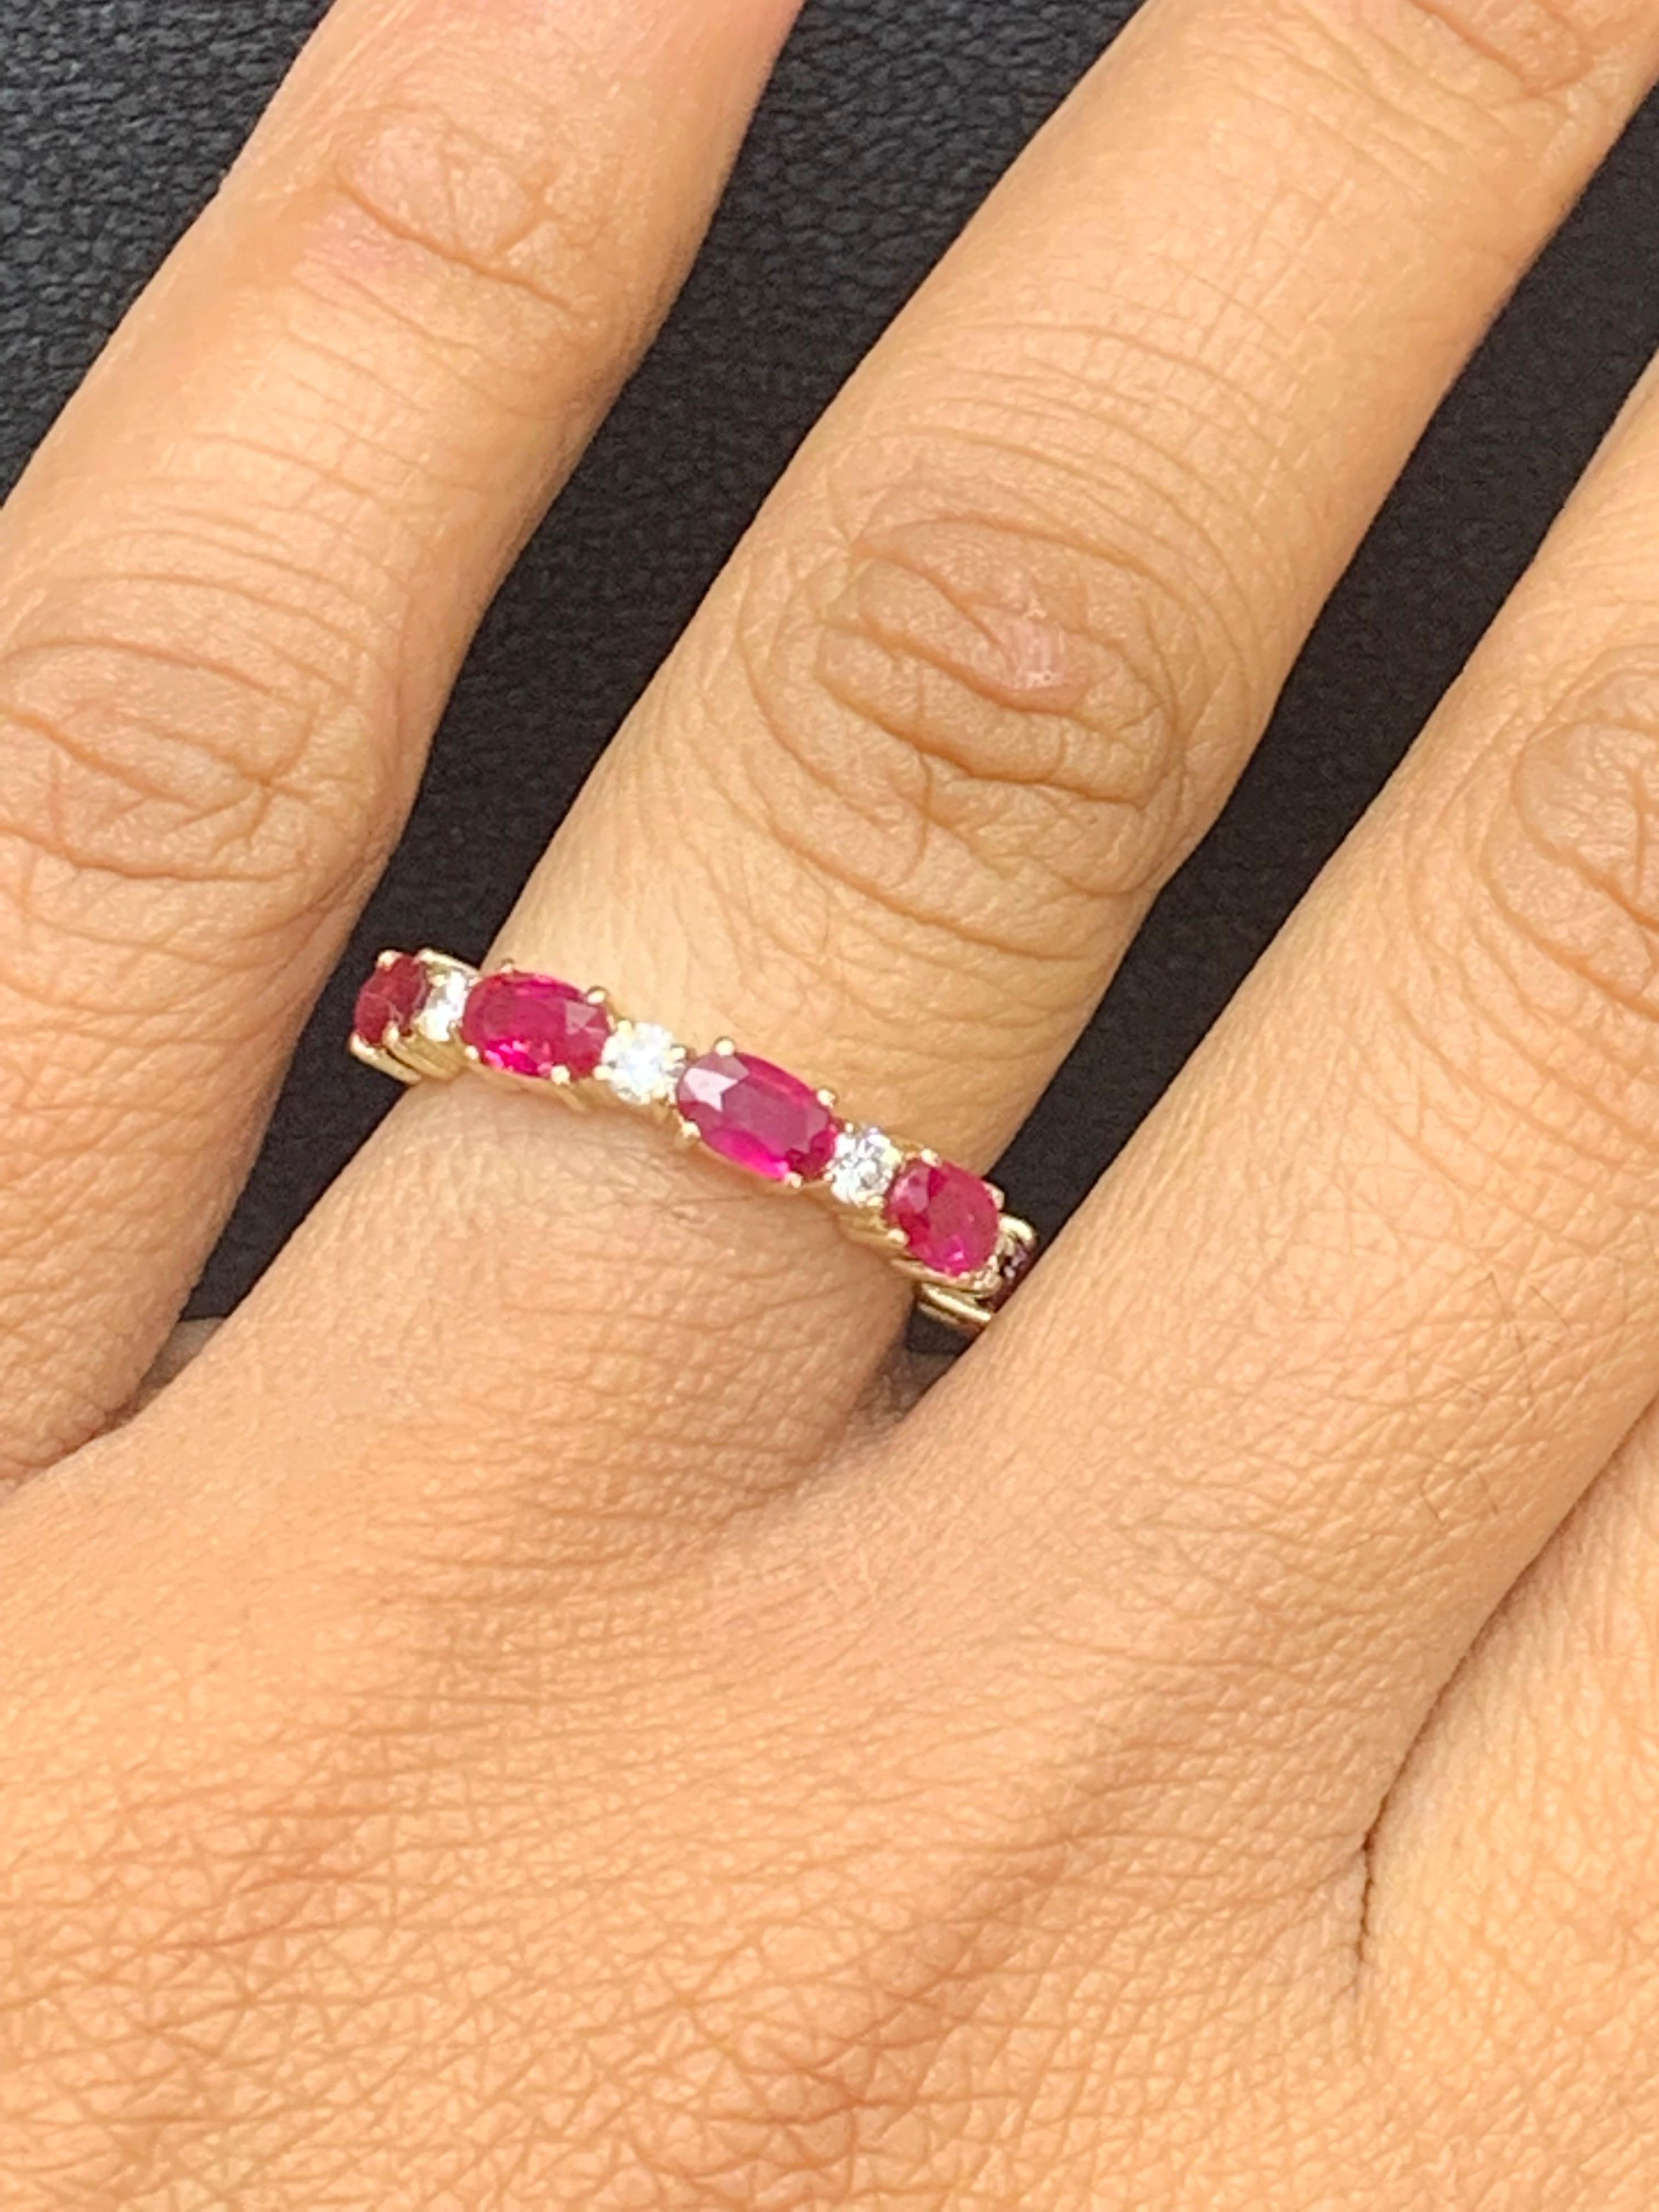 A unique and fashionable wedding band style showcasing 5 Oval Cut Ruby spaced by brilliant-cut diamonds, set in a shared-prong open gallery mounting made in 14k yellow gold. Ruby weighs 1.22 carats total; diamonds weigh 0.20 carats total. Size 6.5